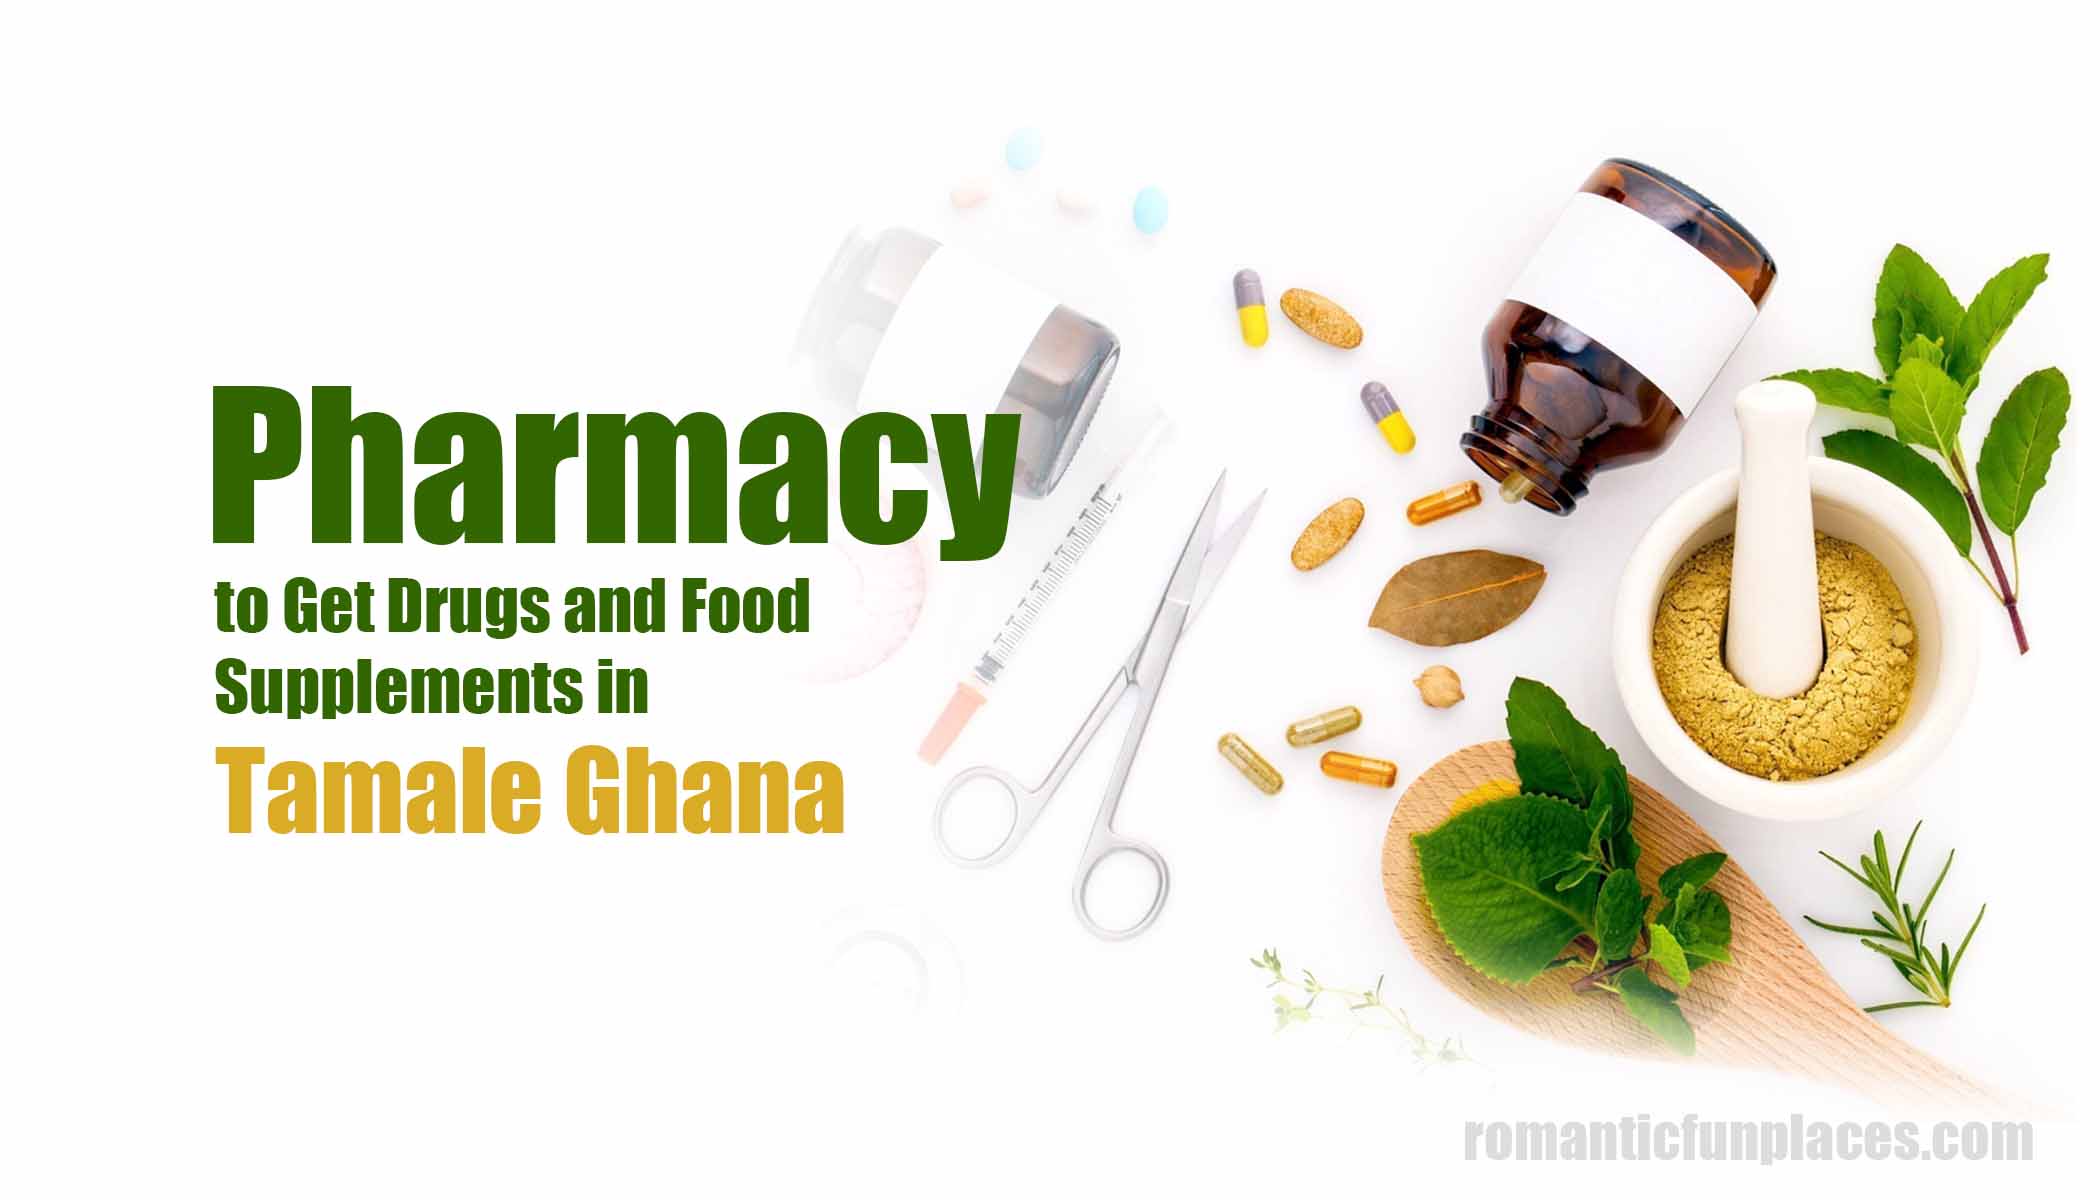 Pharmacy to Get Drugs and Food Supplements in Tamale Ghana